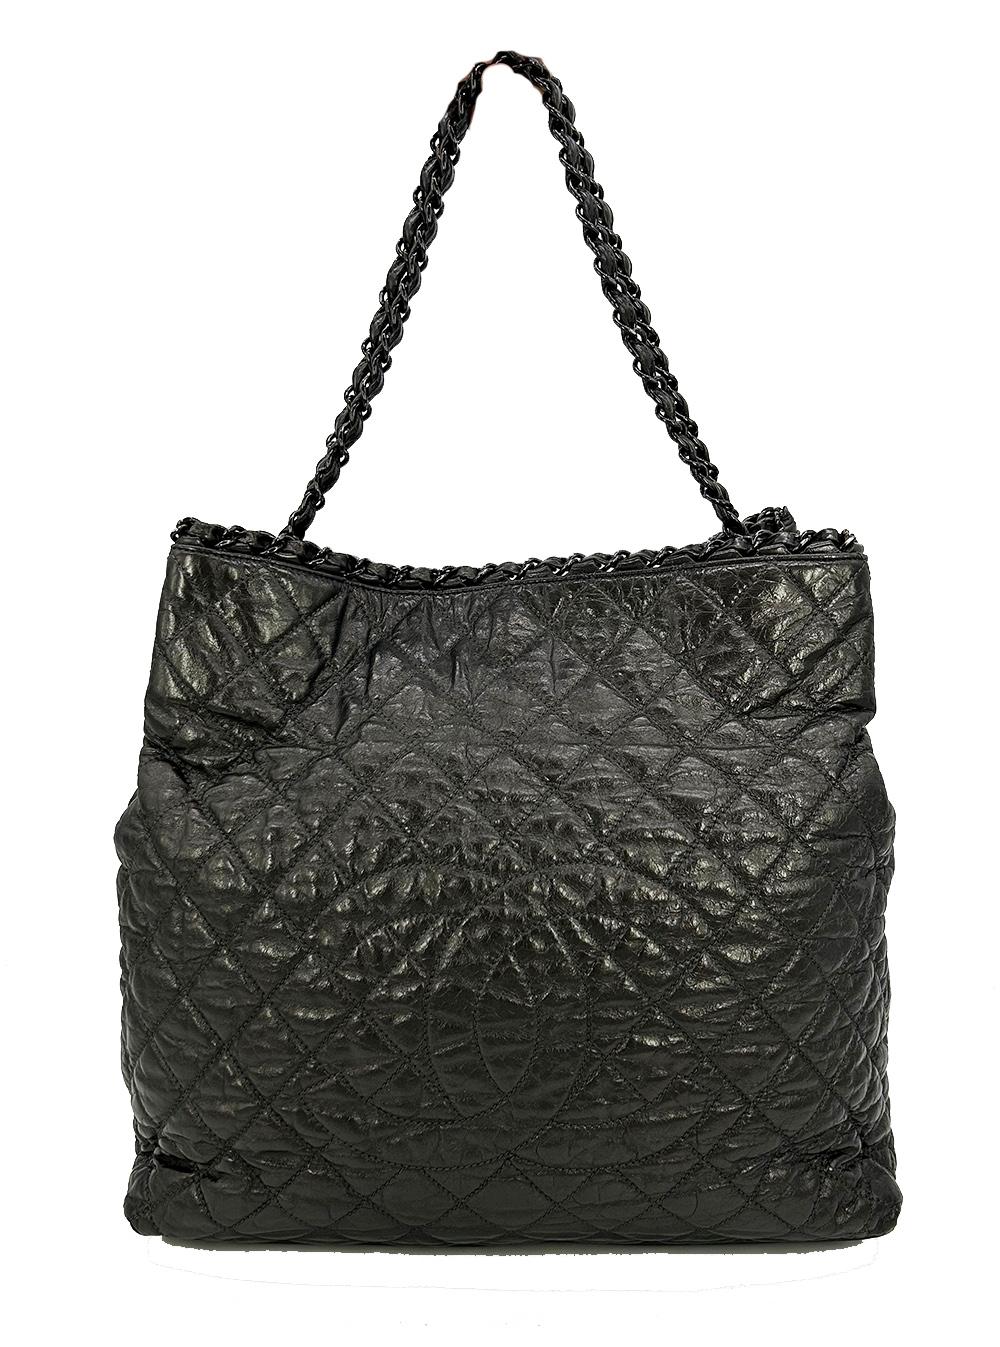 Chanel Grey Metallic Leather Chain Me Shoulder Bag Tote in excellent condition. Metallic ddark grey leather quilted in signature diamond pattern trimmed with dark gunmetal hardware and woven chain and leather shoulder strap and top edge. Quilted CC